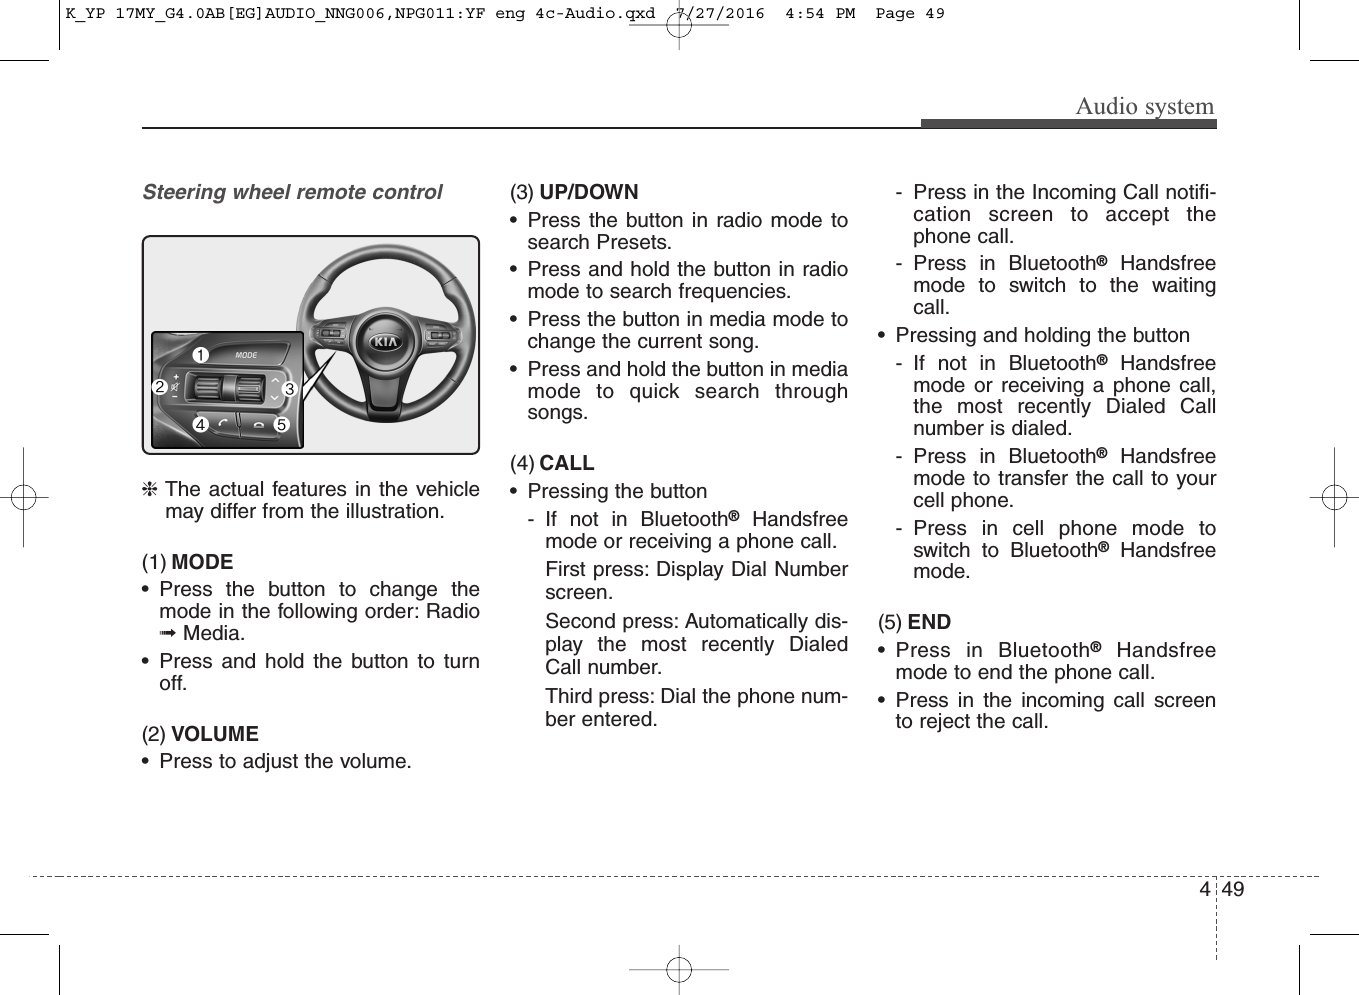 Audio systemSteering wheel remote control❈The actual features in the vehiclemay differ from the illustration.(1) MODE• Press the button to change themode in the following order: Radio➟Media.• Press and hold the button to turnoff.(2) VOLUME• Press to adjust the volume.(3) UP/DOWN• Press the button in radio mode tosearch Presets.• Press and hold the button in radiomode to search frequencies.• Press the button in media mode tochange the current song.• Press and hold the button in mediamode to quick search throughsongs.(4) CALL• Pressing the button- If not in Bluetooth®Handsfreemode or receiving a phone call. First press: Display Dial Numberscreen.Second press: Automatically dis-play the most recently DialedCall number.Third press: Dial the phone num-ber entered.- Press in the Incoming Call notifi-cation screen to accept thephone call.- Press in Bluetooth®Handsfreemode to switch to the waitingcall.• Pressing and holding the button- If not in Bluetooth®Handsfreemode or receiving a phone call,the most recently Dialed Callnumber is dialed.- Press in Bluetooth®Handsfreemode to transfer the call to yourcell phone.- Press in cell phone mode toswitch to Bluetooth®Handsfreemode.(5) END• Press in Bluetooth®Handsfreemode to end the phone call.• Press in the incoming call screento reject the call.494K_YP 17MY_G4.0AB[EG]AUDIO_NNG006,NPG011:YF eng 4c-Audio.qxd  7/27/2016  4:54 PM  Page 49